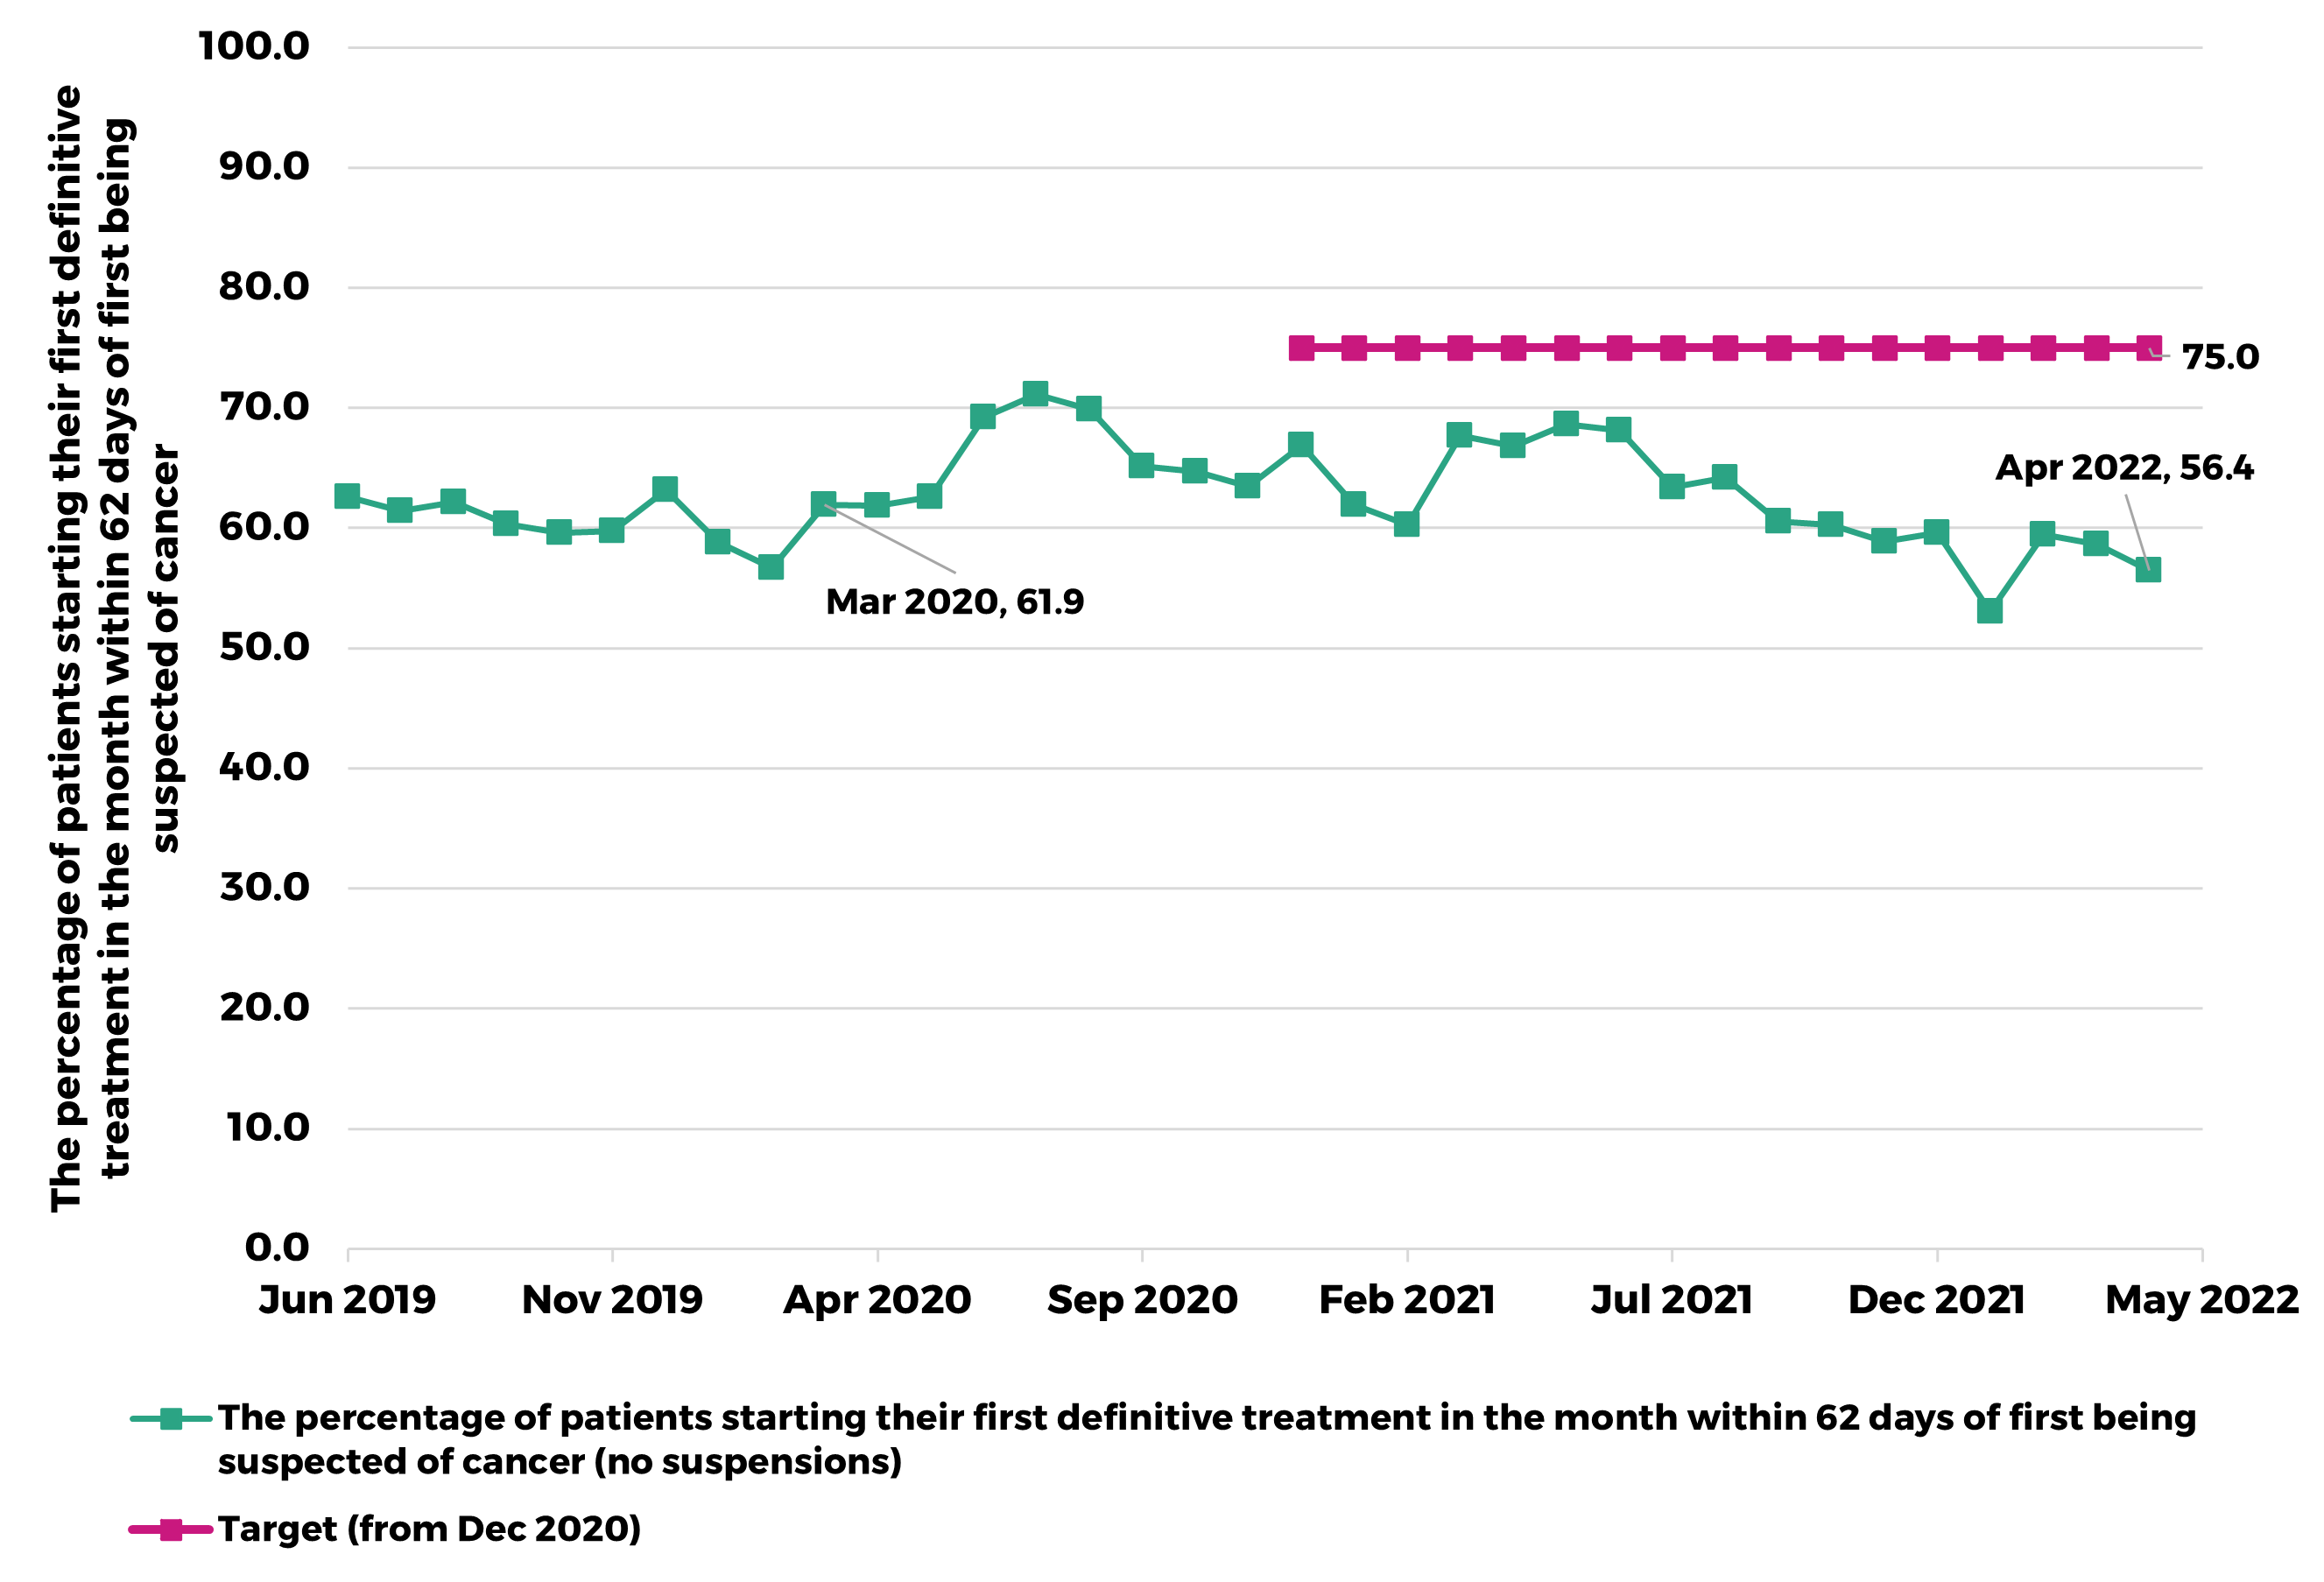 Graph showing that, between June 2019 and April 2022, NHS Wales did not meet the Welsh Government target that 75% of patients receive their first cancer treatment within 62 days of being suspected of having cancer. Just 56.4% of patients in April 2022 received their first treatment within 62 days, compared to 61.9% in March 2020.